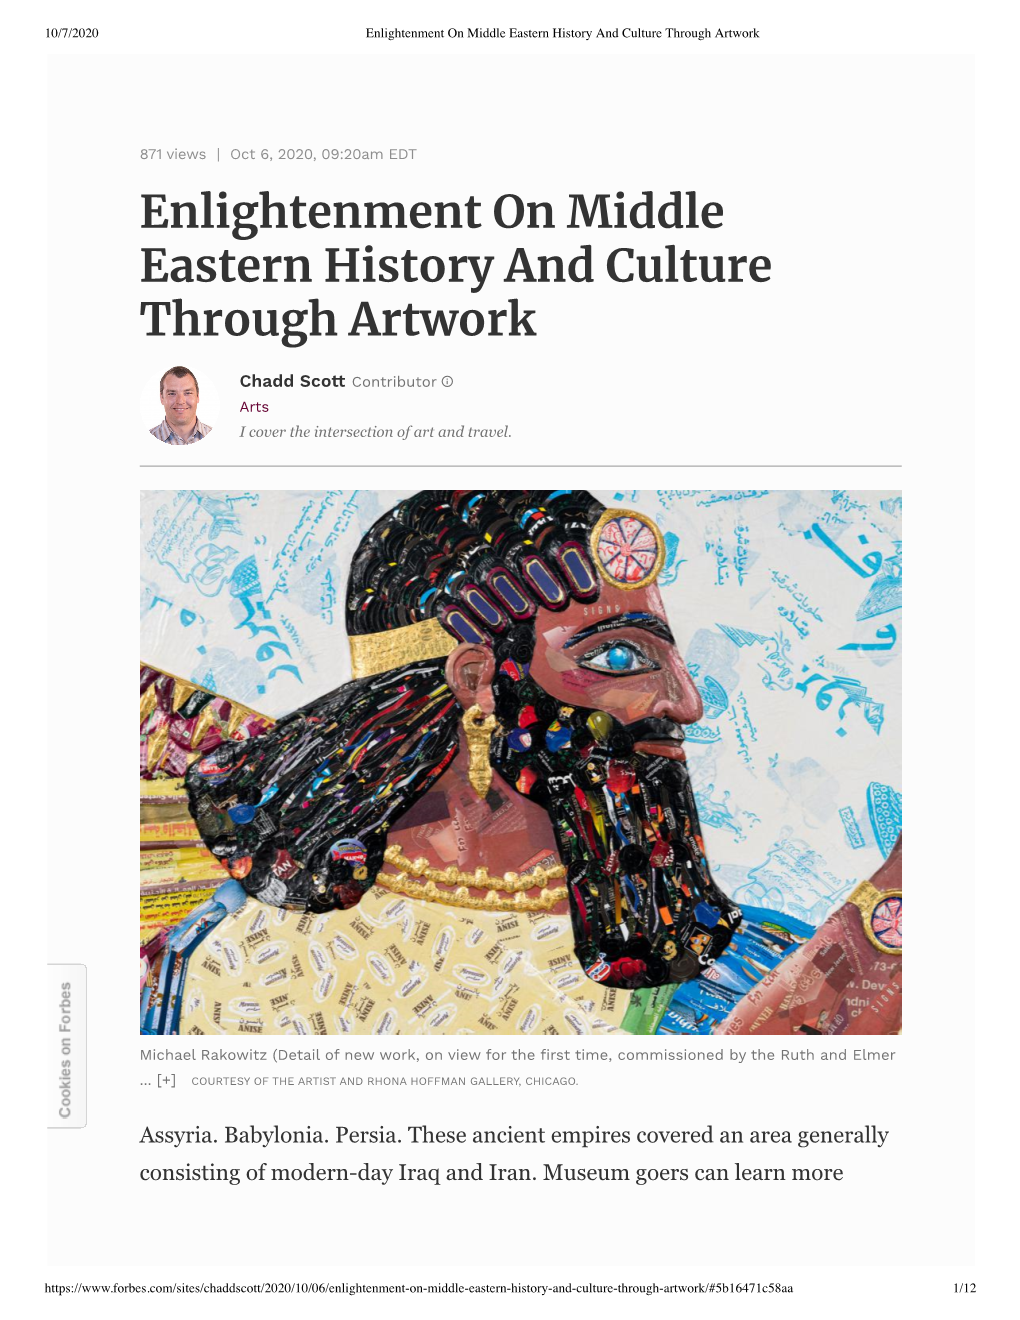 Enlightenment on Middle Eastern History and Culture Through Artwork